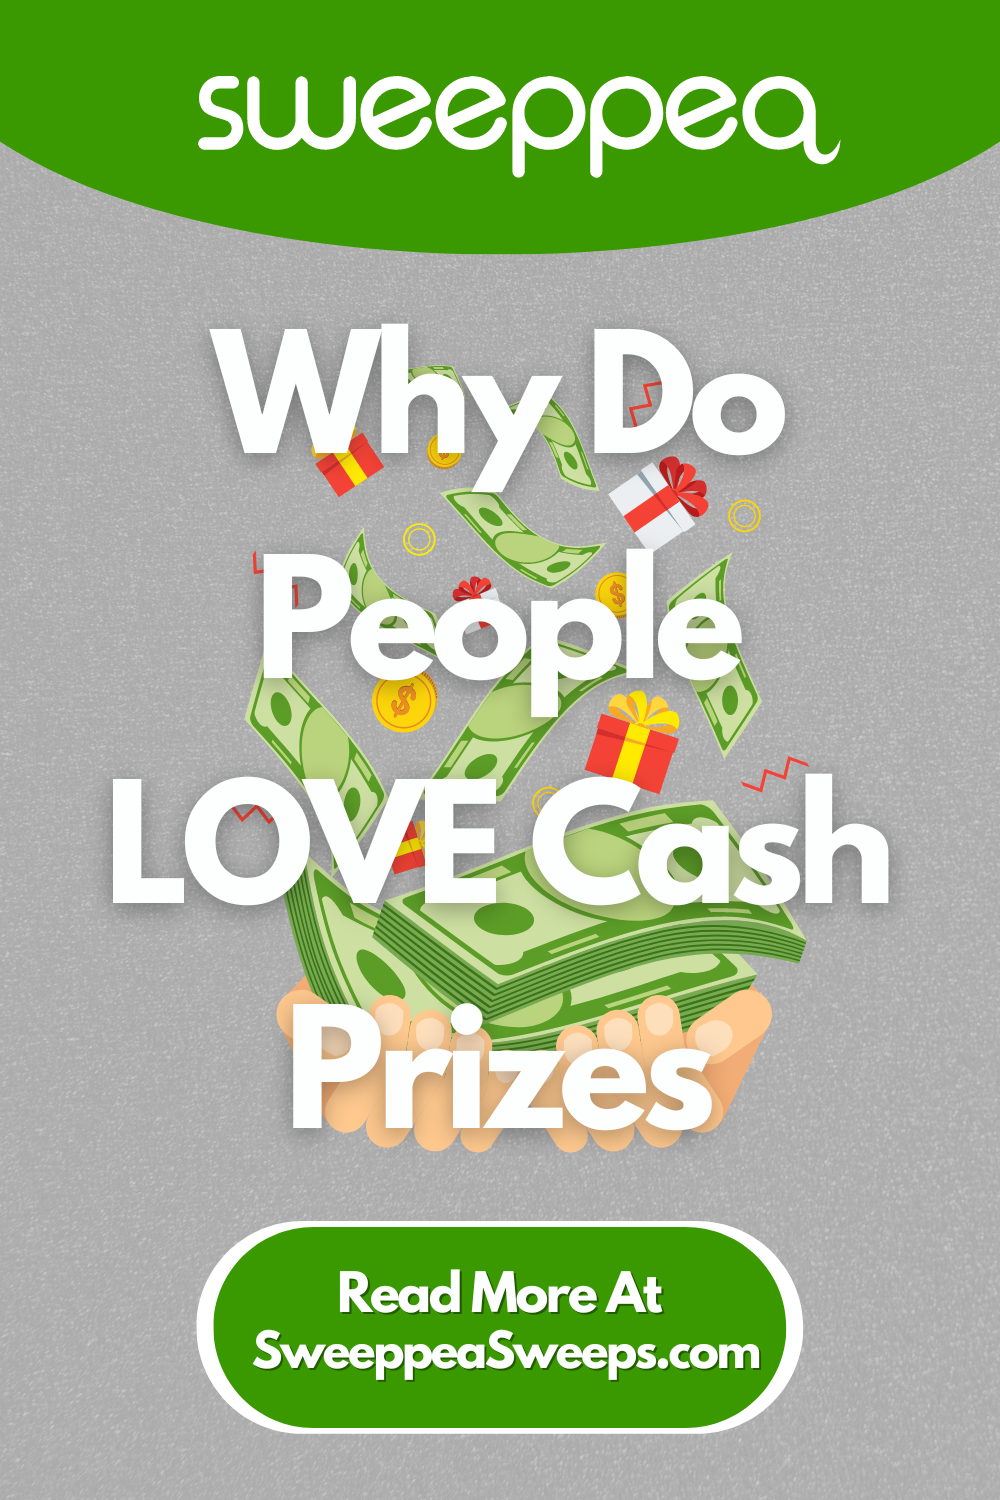 Why Do People LOVE Cash Prizes